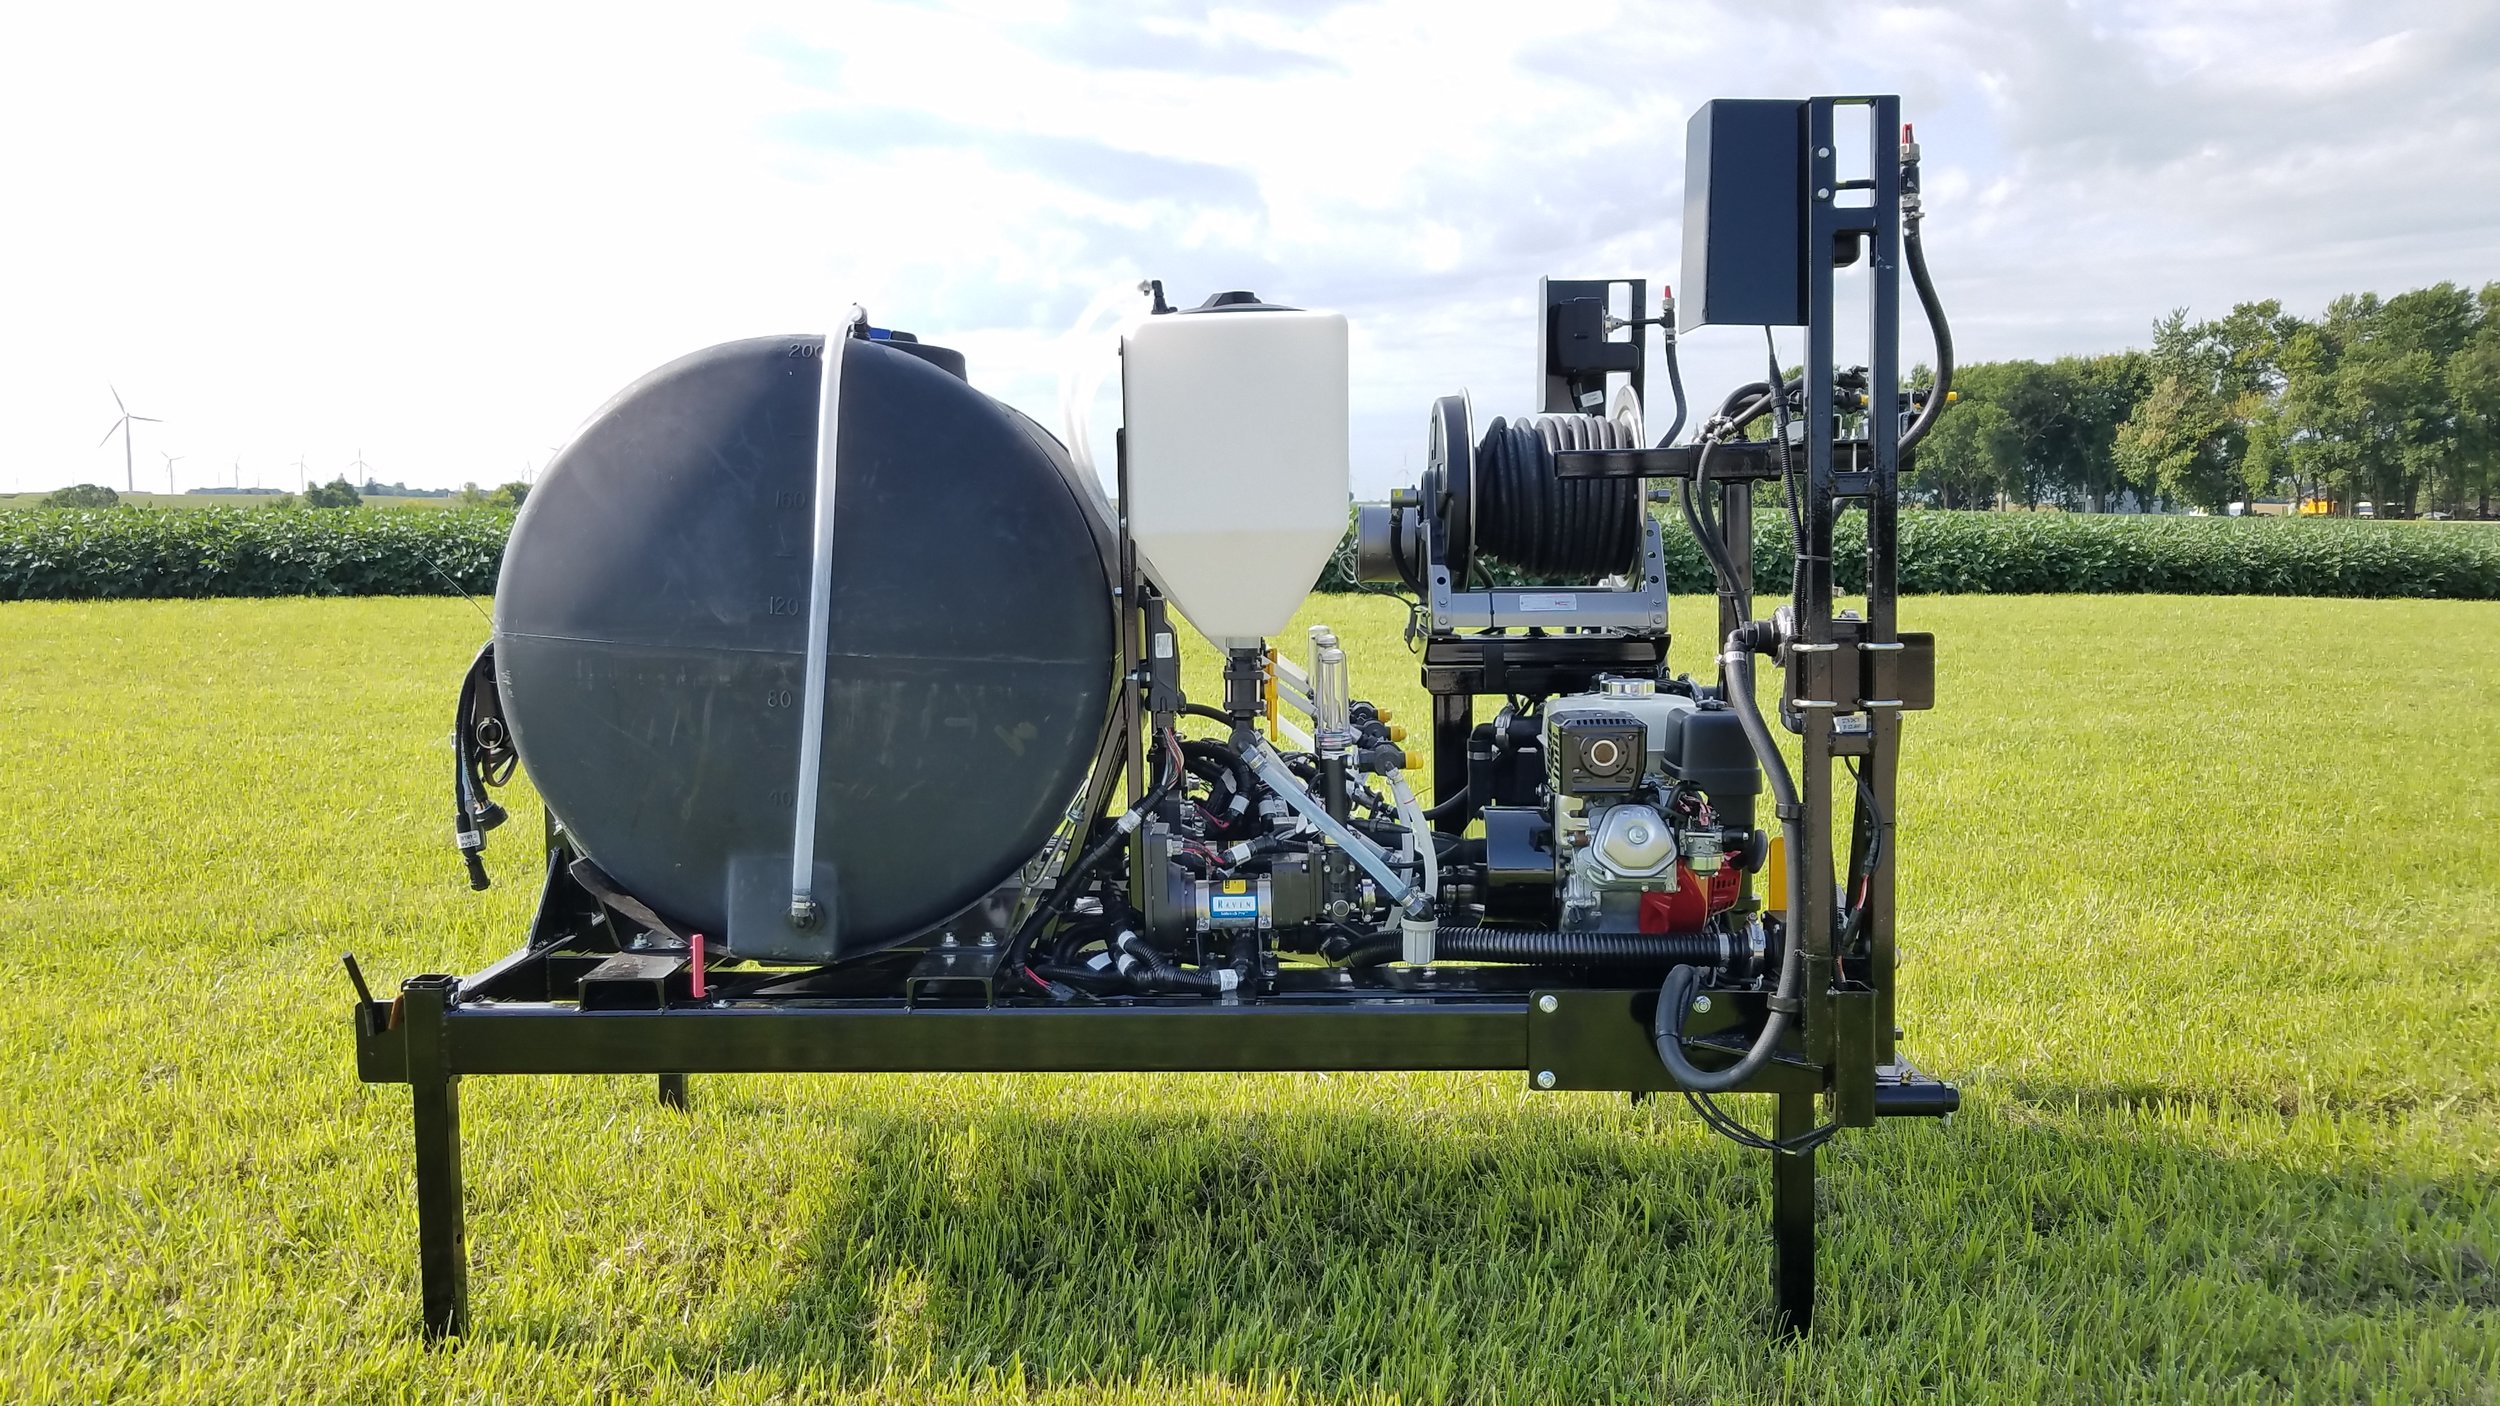  Load this sprayer in the back of your pickup or pick it up with your tractors 3-pt. to spray road ditches or pastures among other things. Includes gas powered centrifugal pump along with the capability of direct injecting up to three chemicals and s